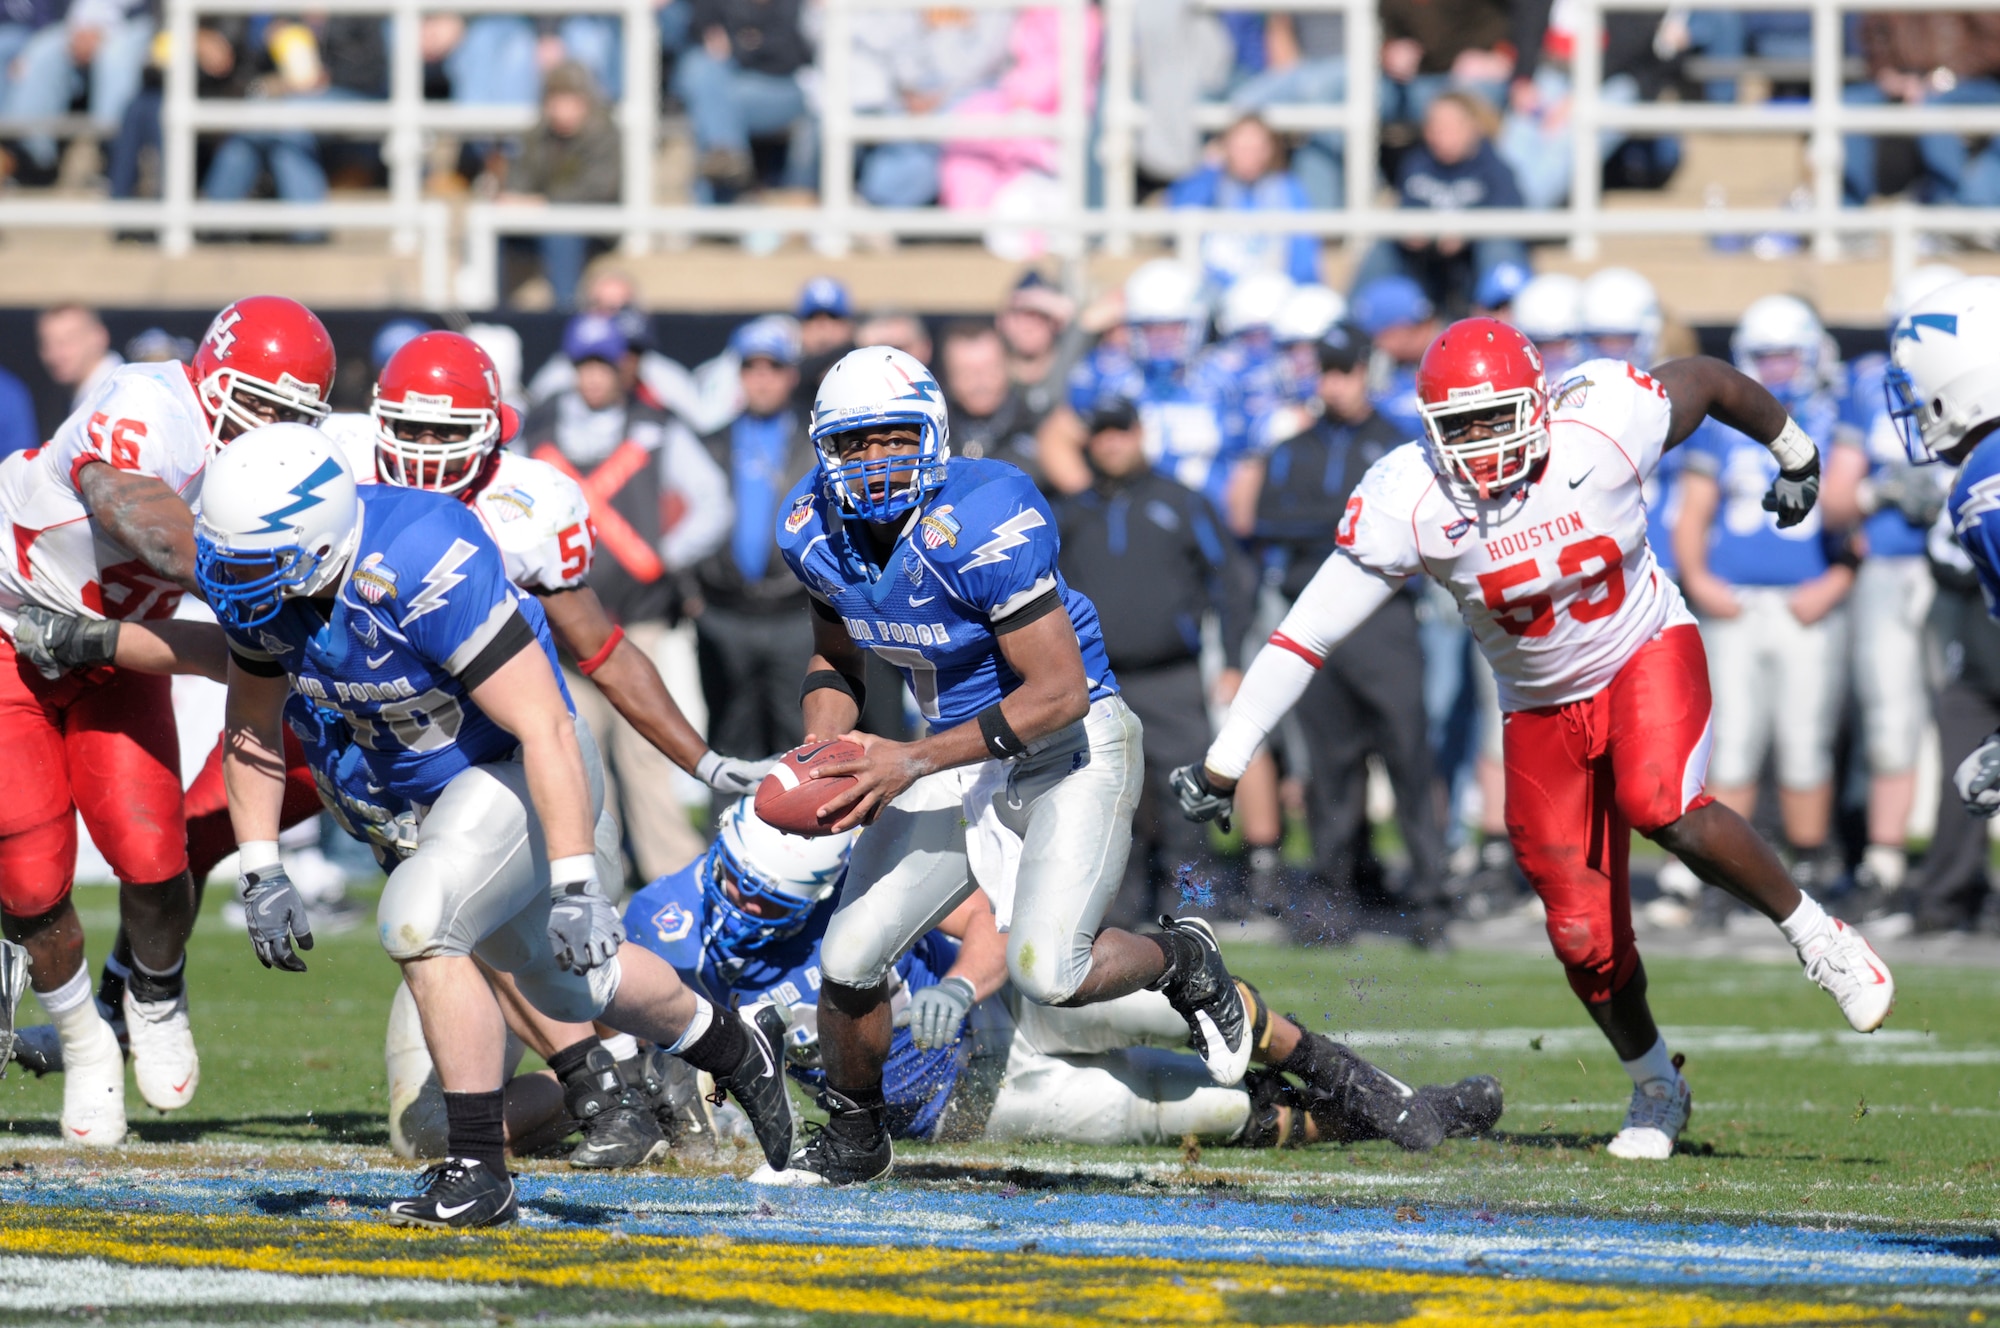 Under pressure, U.S. Air Force Academy quarterback Tim Jefferson looks to pitch the ball to a running back during the sixth annual Bell Helicoptor Armed Forces Bowl Dec. 31. The Academy set a new Armed Forces Bowl game rushing yardage record, running 67 times for 243 yards, but fell short of beating the University of Houston Cougars, 34-28. (U.S. Air Force photo/David Armer)